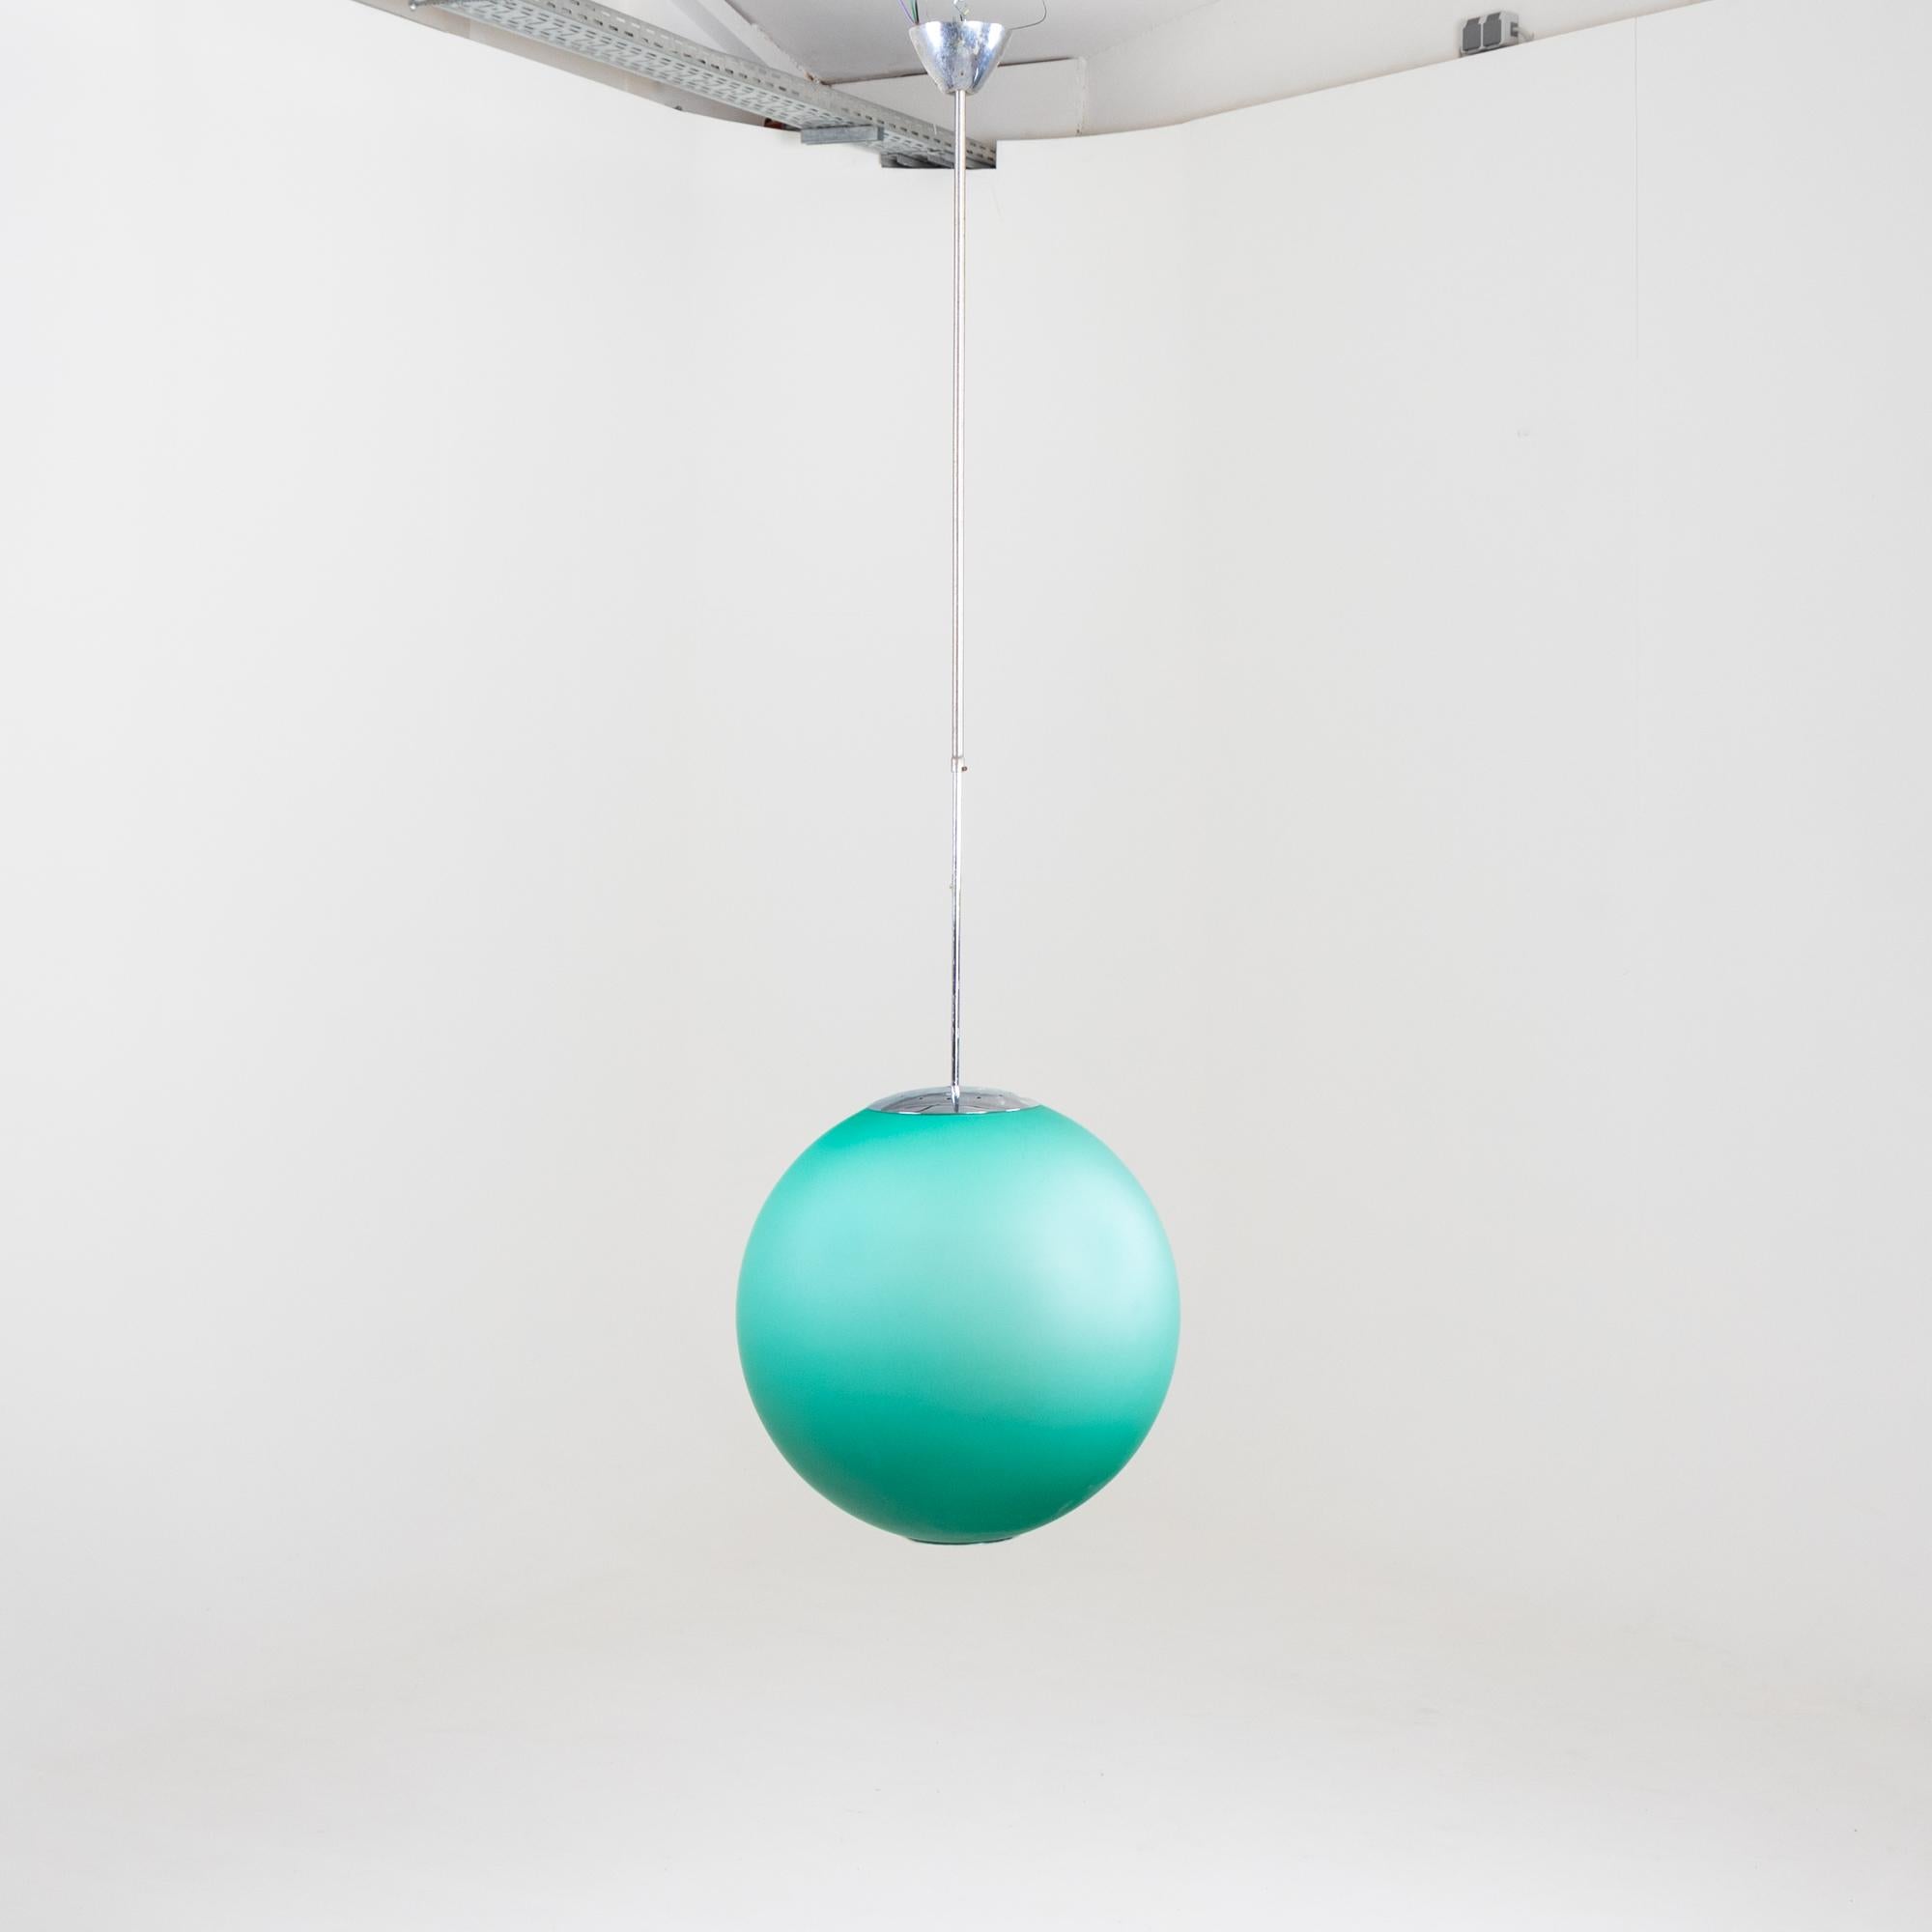 Mid-Century Modern Turquoise Globe Ceiling Lamp by Fontana Arte, Italy Mid-20th Century For Sale